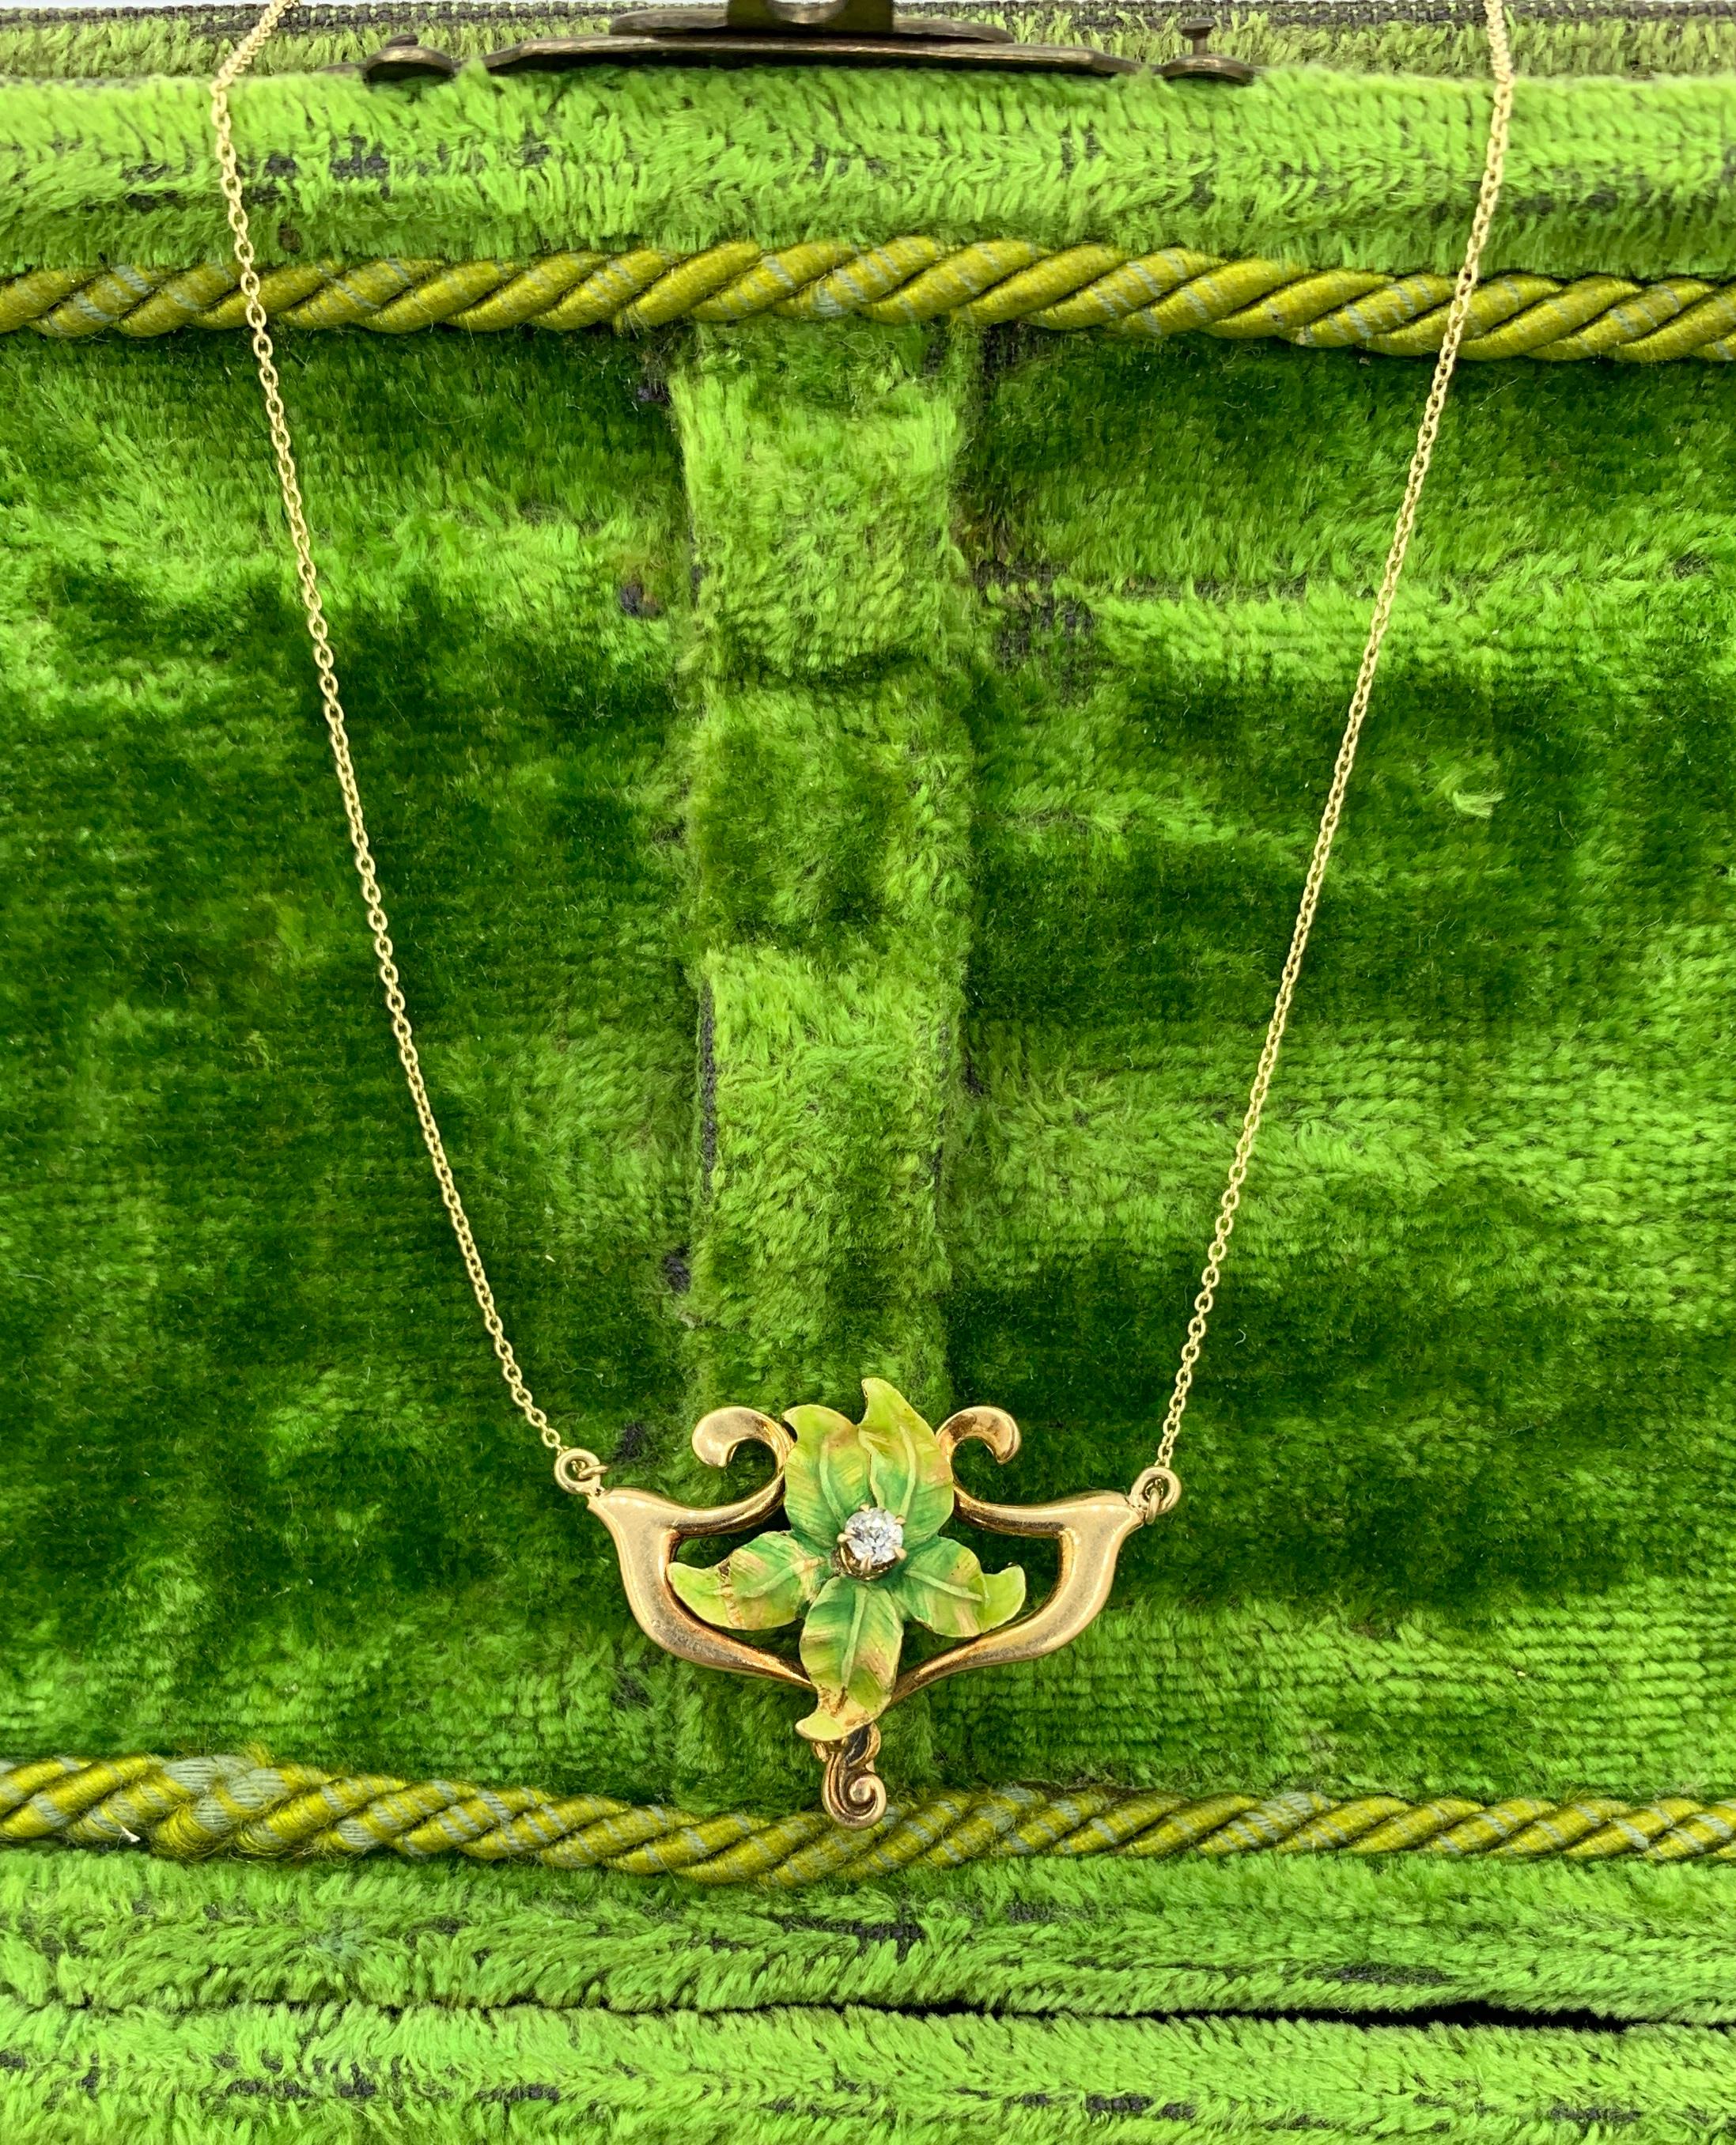 THIS IS A GORGEOUS VICTORIAN - ART NOUVEAU PENDANT NECKLACE WITH A BEAUTIFUL GREEN ENAMEL ORCHID FLOWER WITH AN OLD MINE CUT DIAMOND IN THE CENTER.  THE FLOWER IS SET IN AN ELEGANT GOLD RIBBON SURROUND WITH LOVELY ART NOUVEAU DESIGN.  THE PENDANT